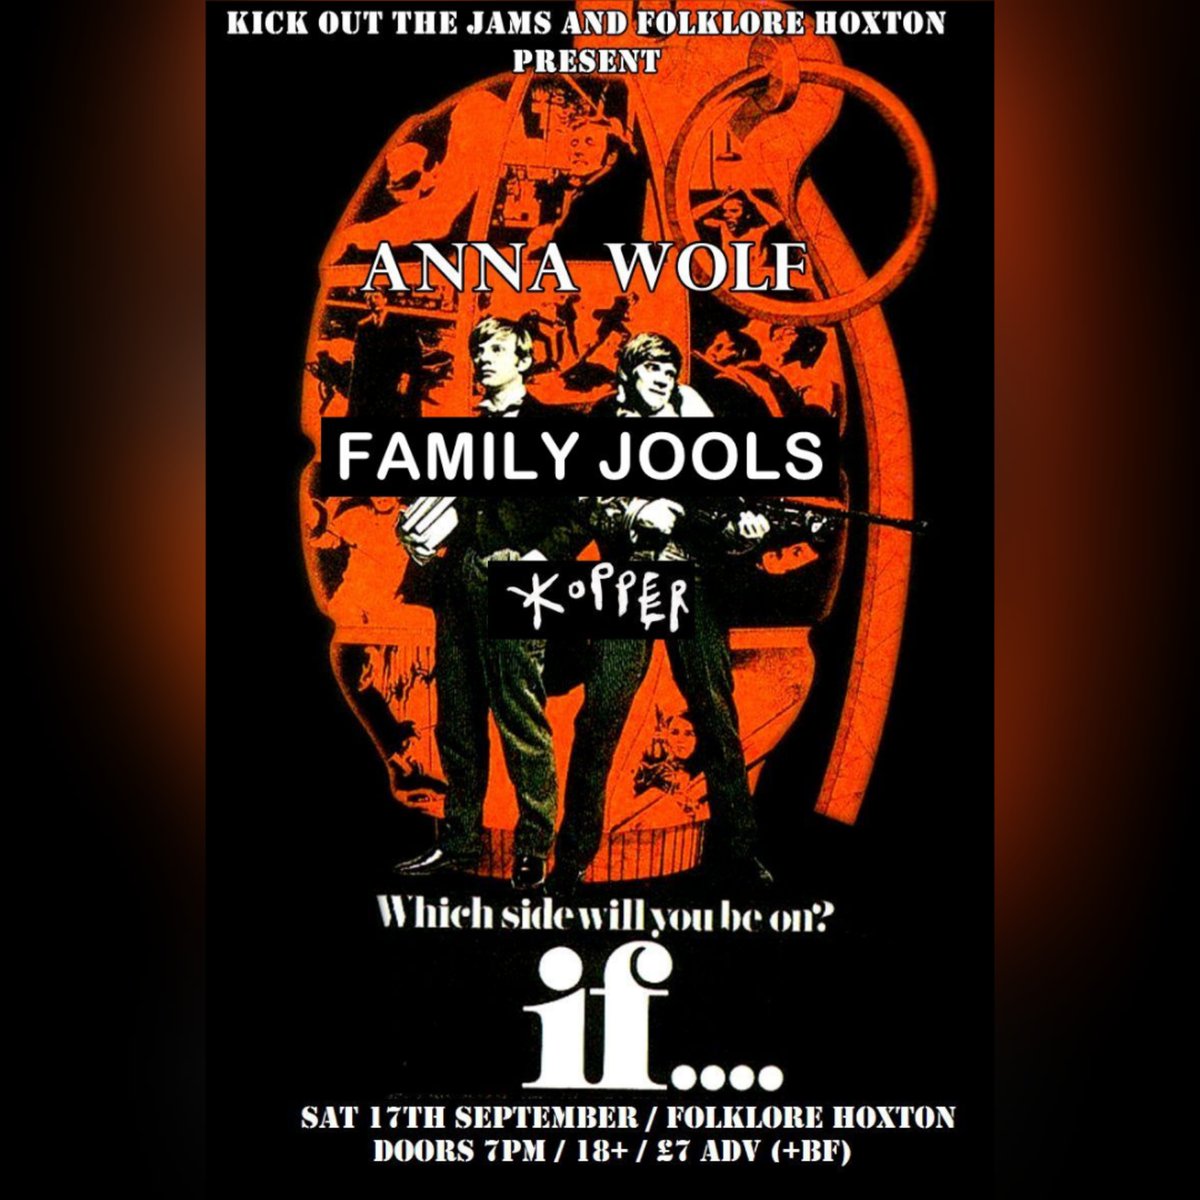 Due to one of the bands going AWOL, we've made a line-up change to Saturday's show which now features @familyjoolsband who join @KopperMusic as supports for @RealAnnaWolf. Tix: dice.fm/partner/folklo…